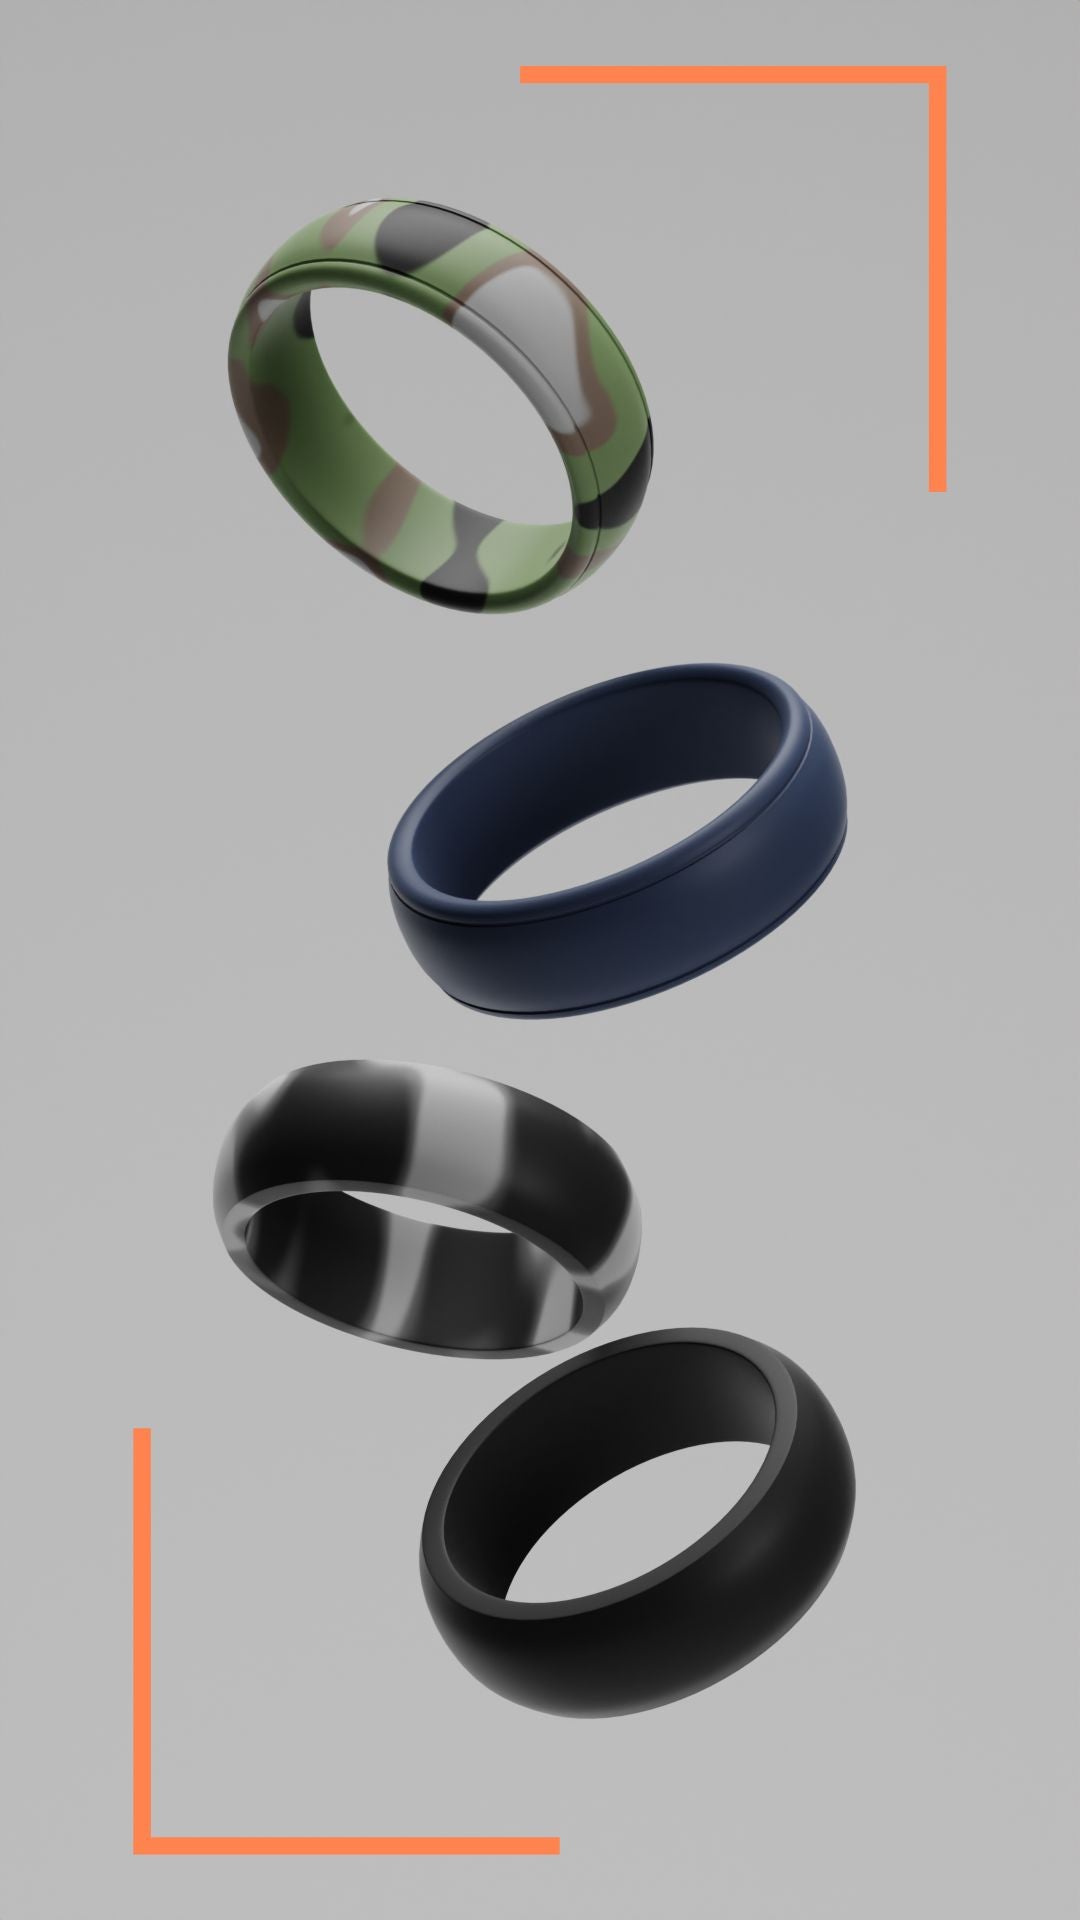 SMTCoffee - Silicone Wedding Rings for Men - 4 Rings - Wedding Bands Design 8.7mm Wide - 2.5mm Thickness